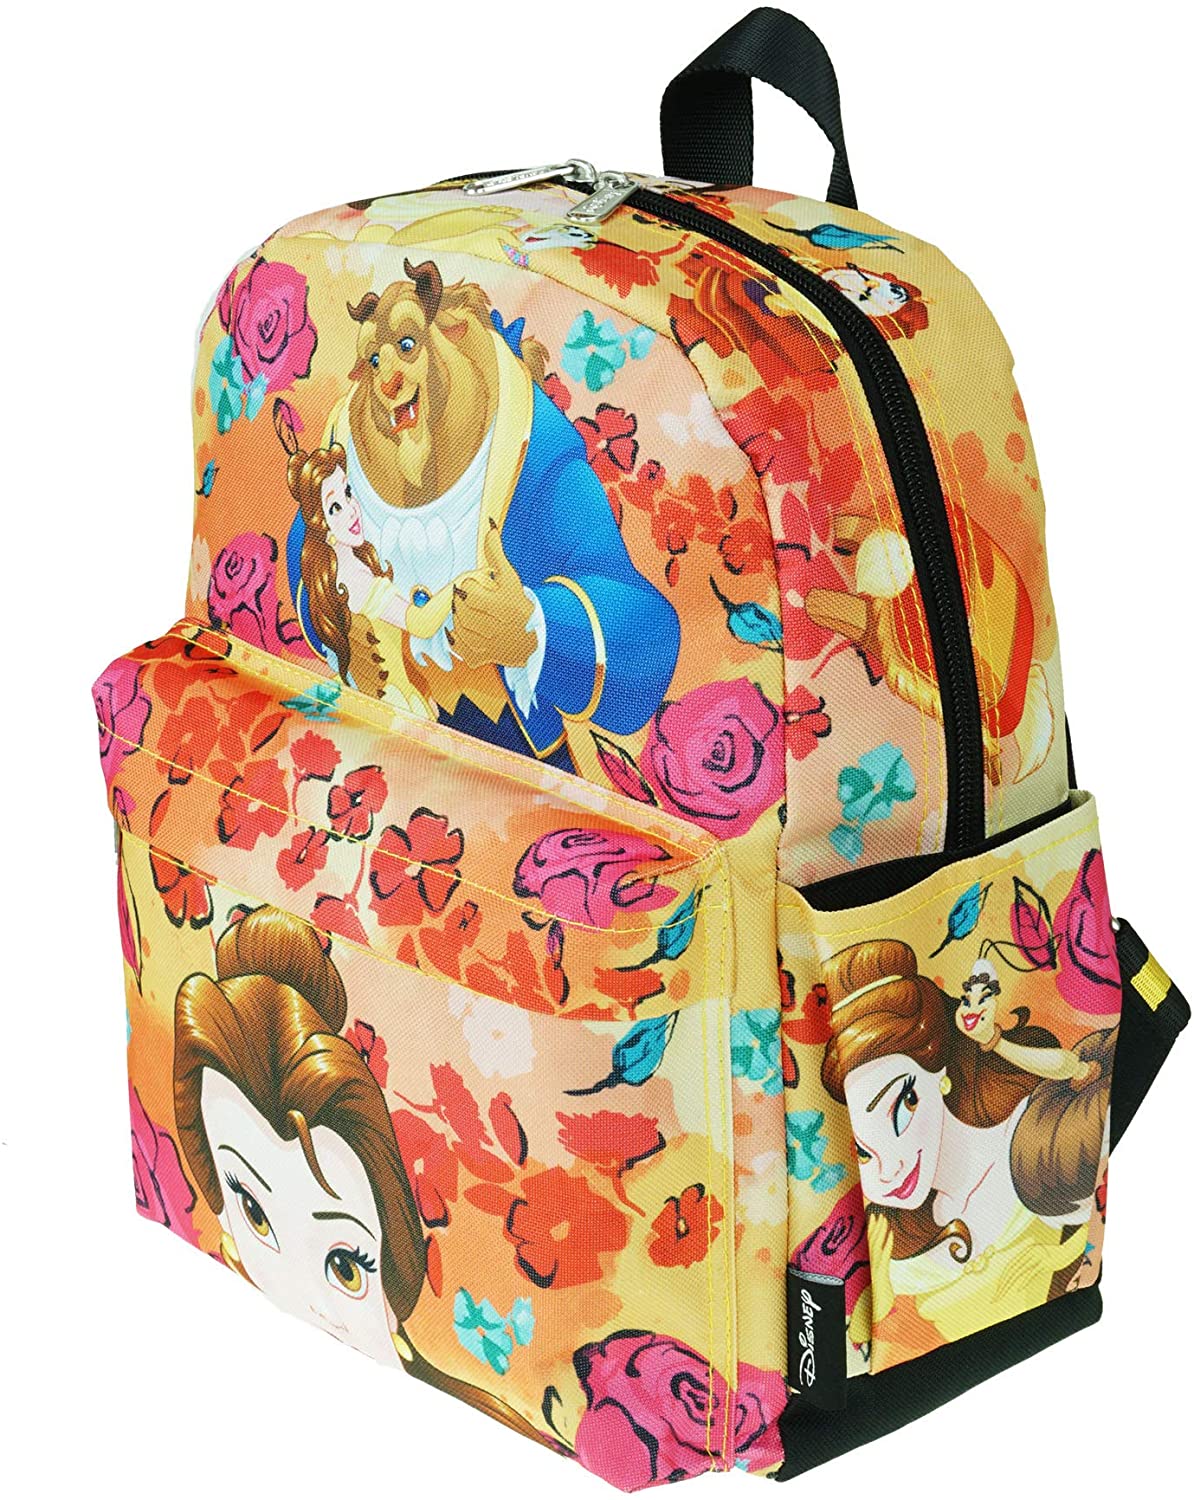 Beauty and the Beast 12" Deluxe Oversize Print Daypack - A21306 - GTE Zone